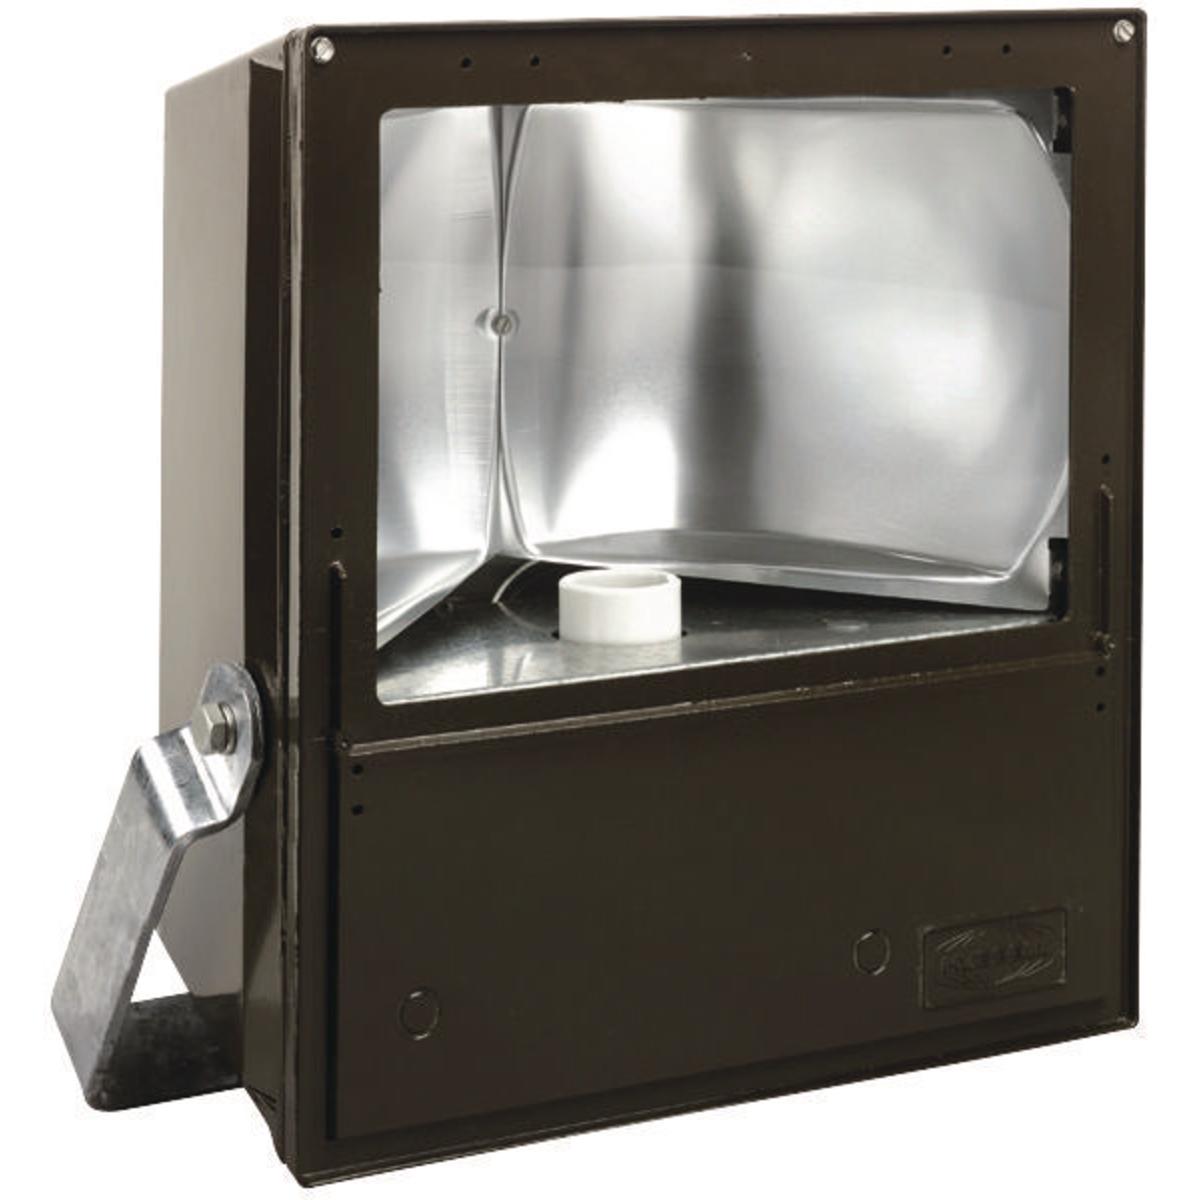 Hubbell KFS250-76 KF Series - Aluminum 250 Watt High Pressure Sodium Marine Floodlight(Lamp Not Included) - Quadri-Volt (120/208/240/277V) At 60Hz  ; Rugged weathertight housing of copperfree aluminum with corrosion resistant bronze finish ; Wide beam distribution ; Therma